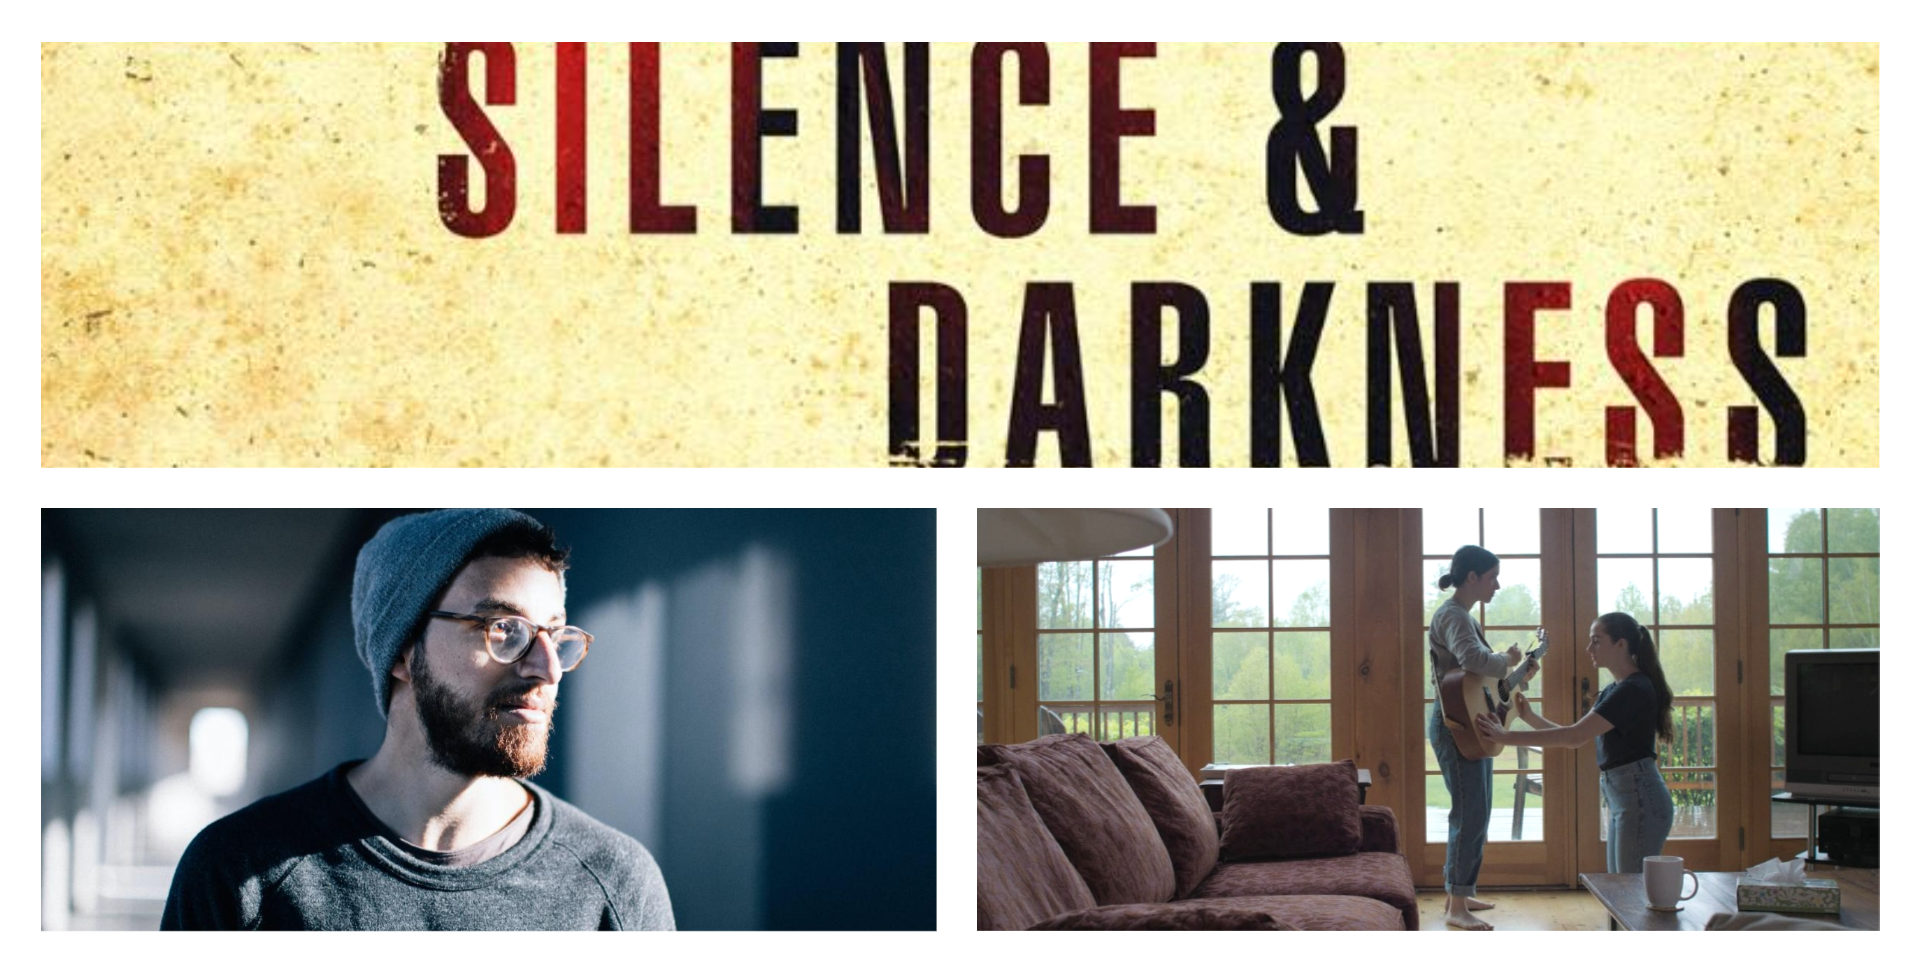 Interview with Barak Barkan - Silence and Darkness